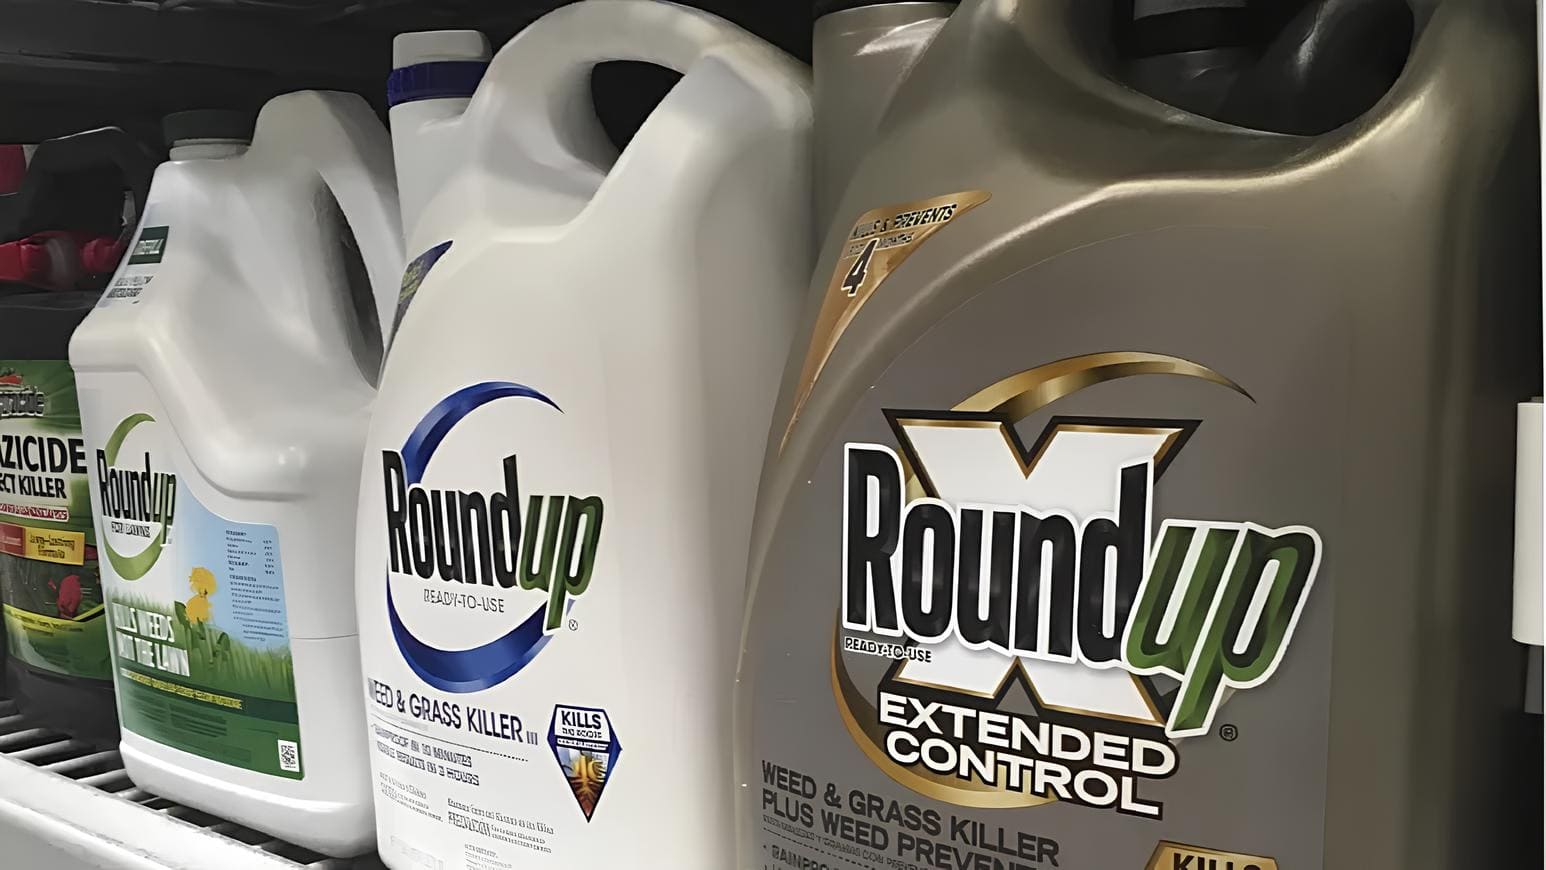 EU to Renew Herbicide Glyphosate Approval for 10 Years